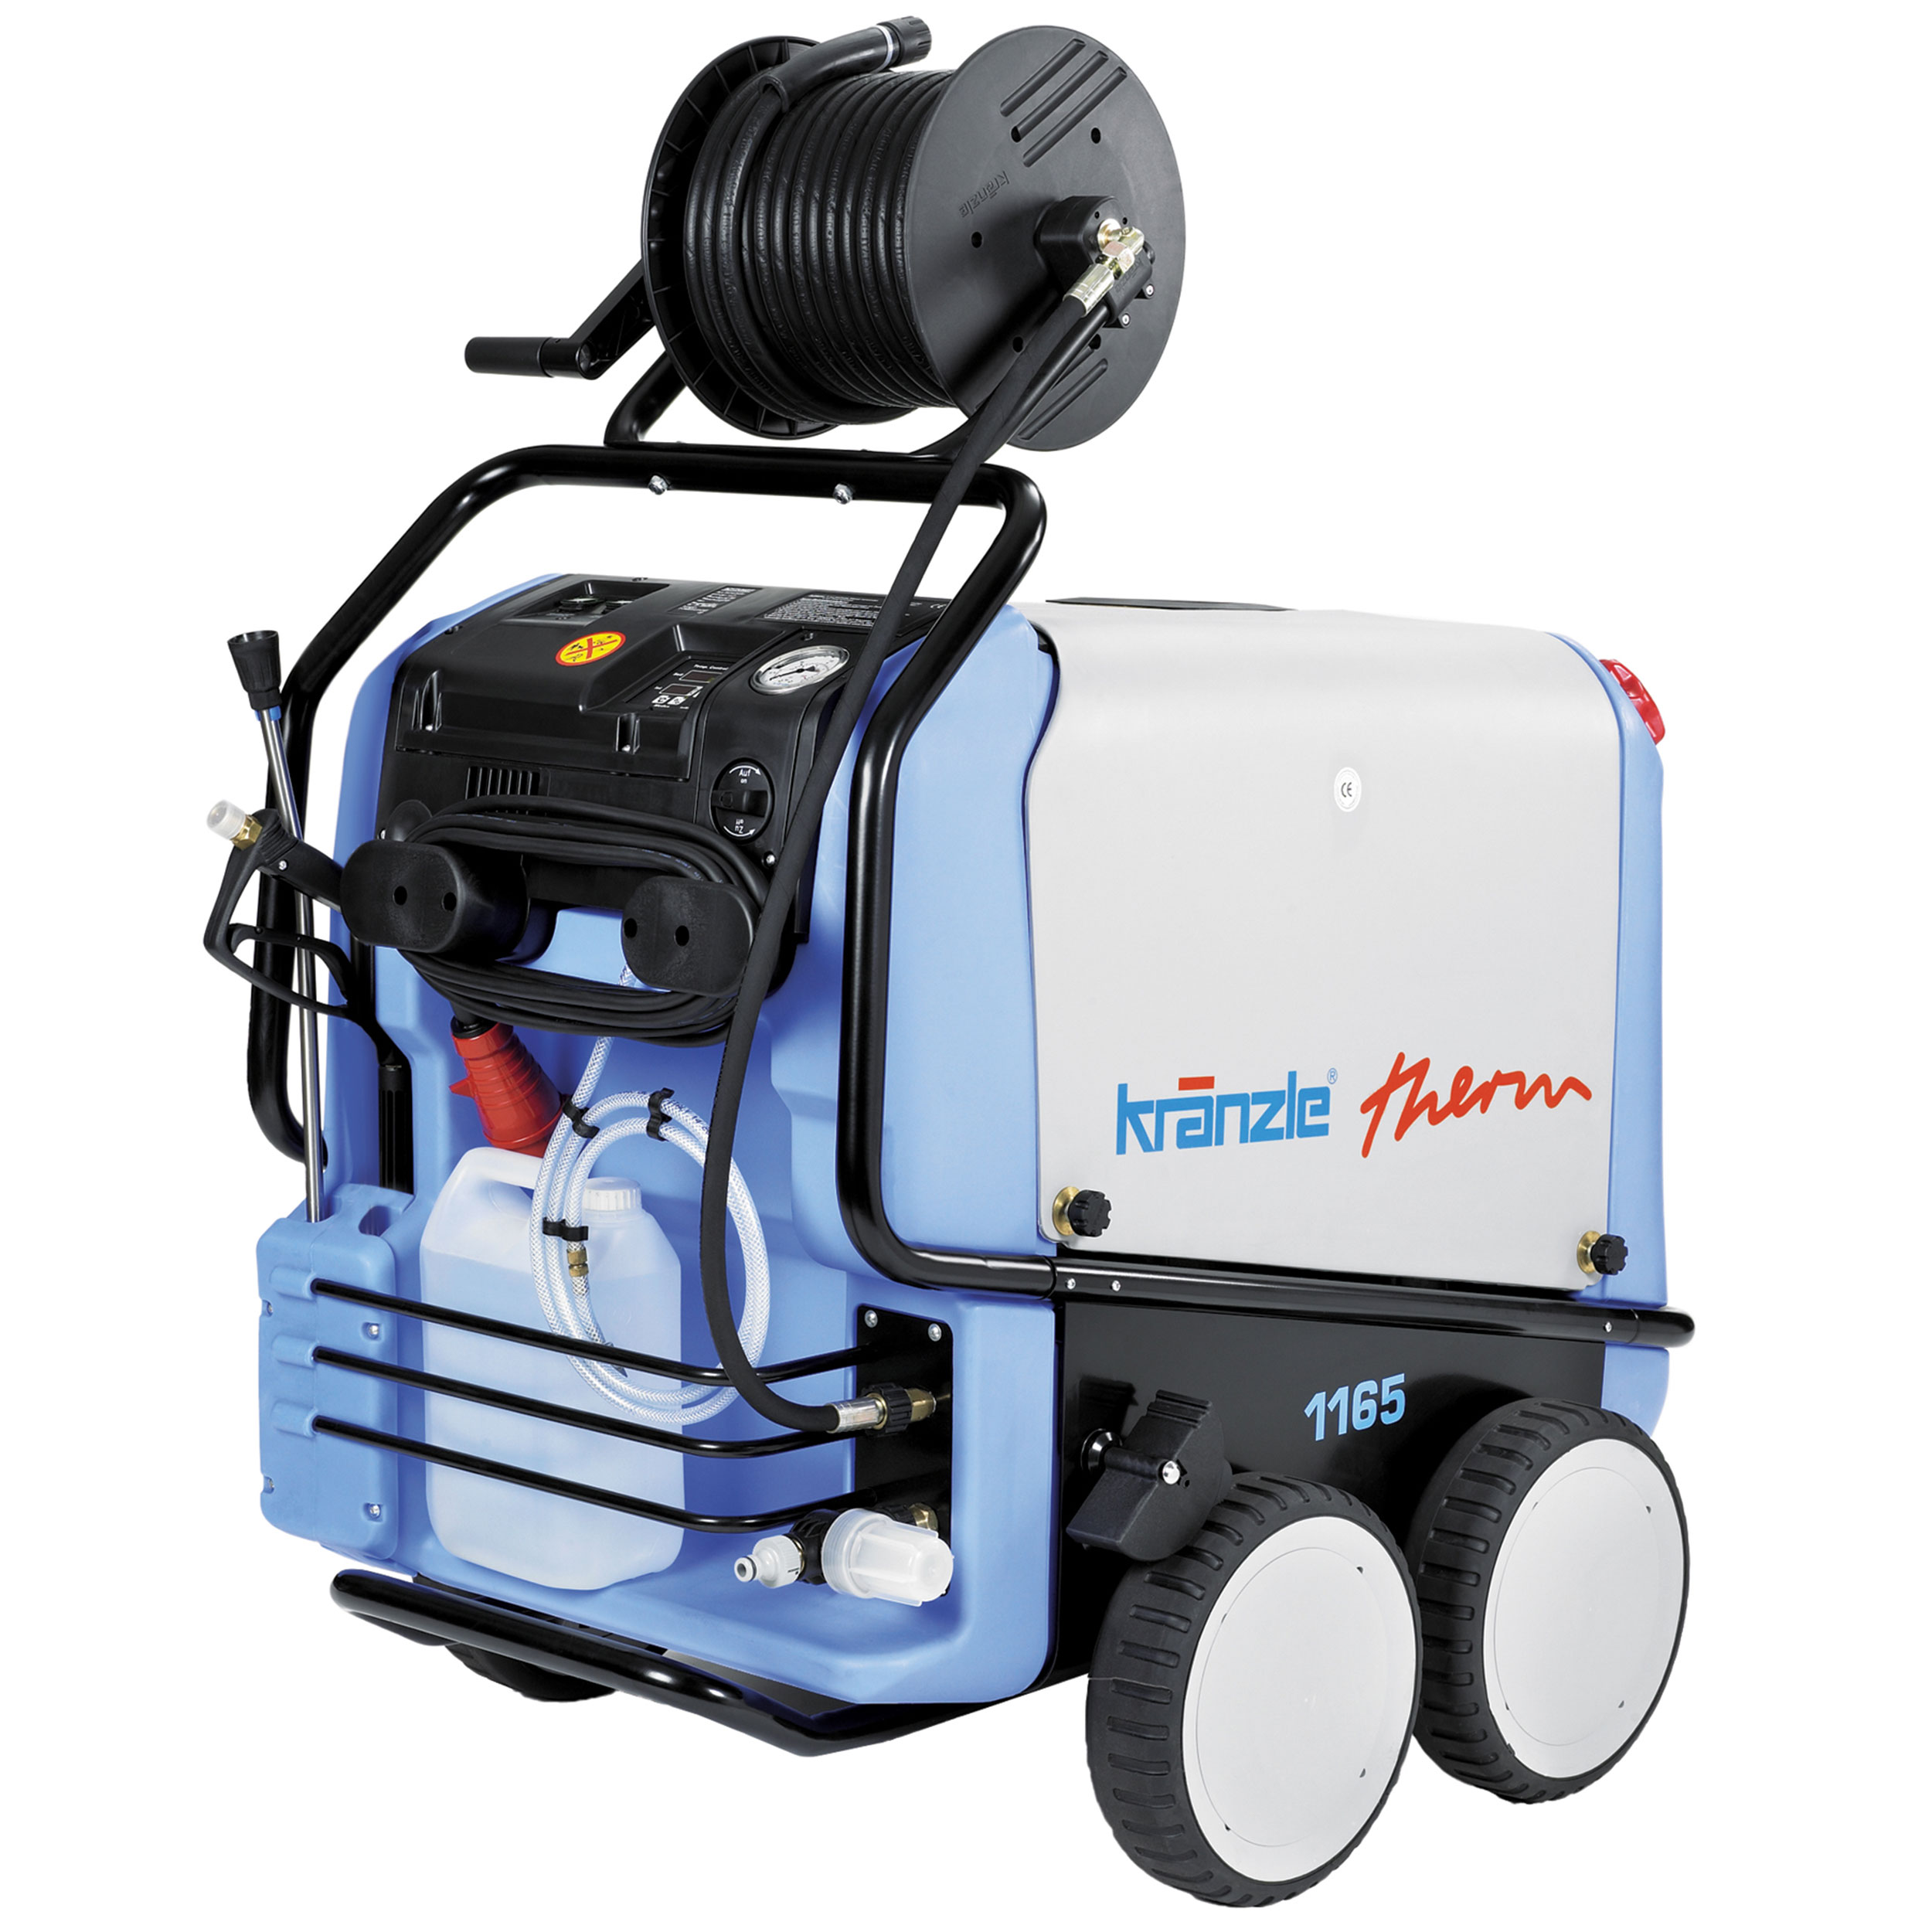 Therm 2175tst Pressure Washer, Hot Water, 220v, 25a, 1ph